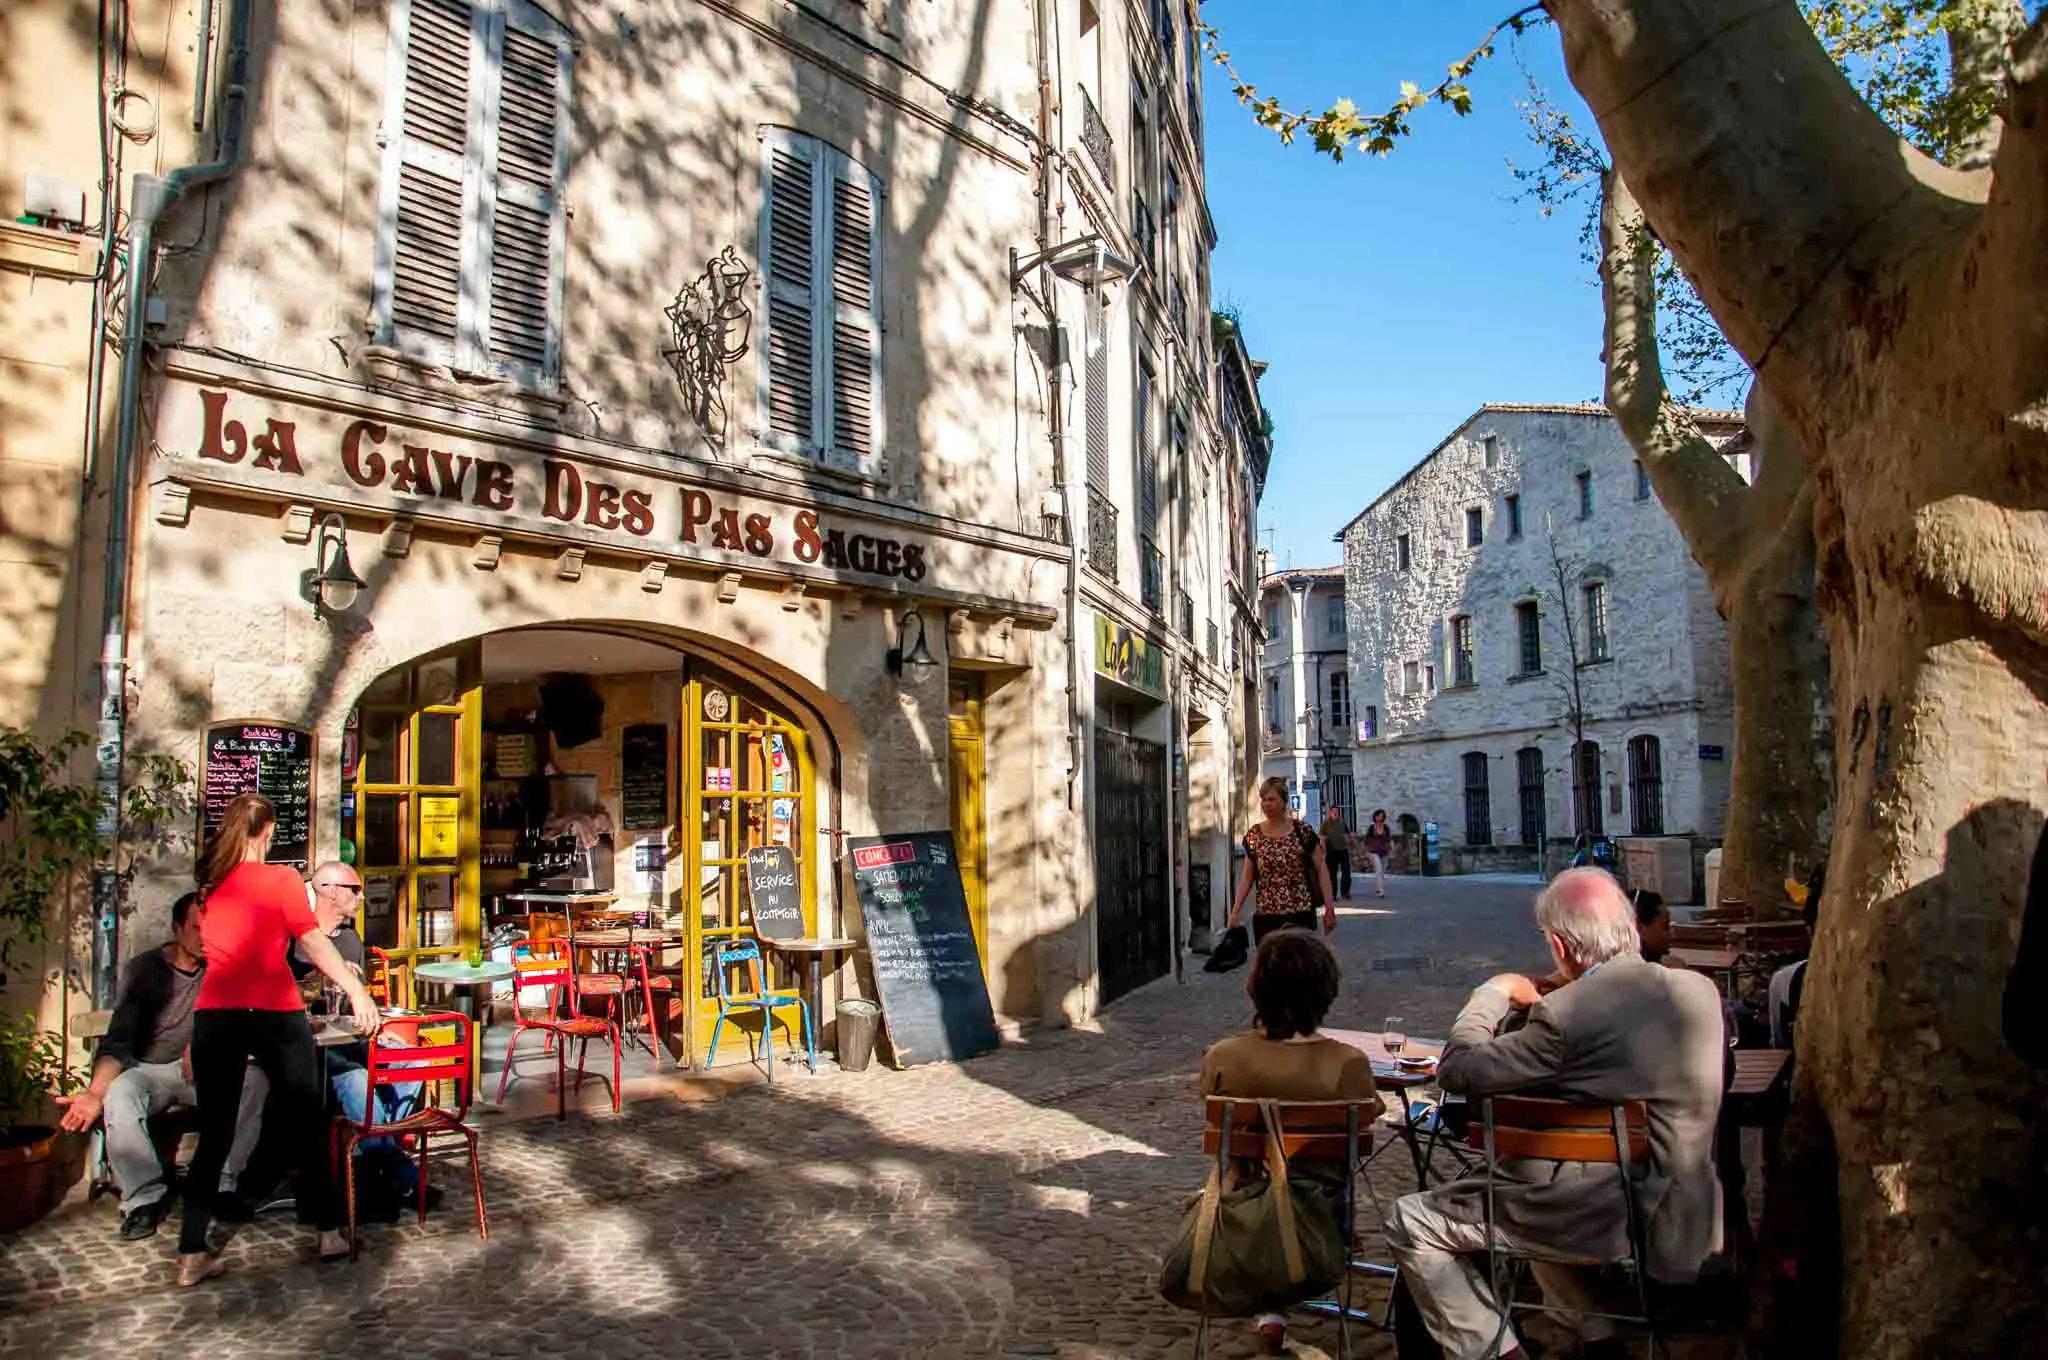 People lounging outside a cafe with open doors and a sign for "La Cave des Pas Sage." 